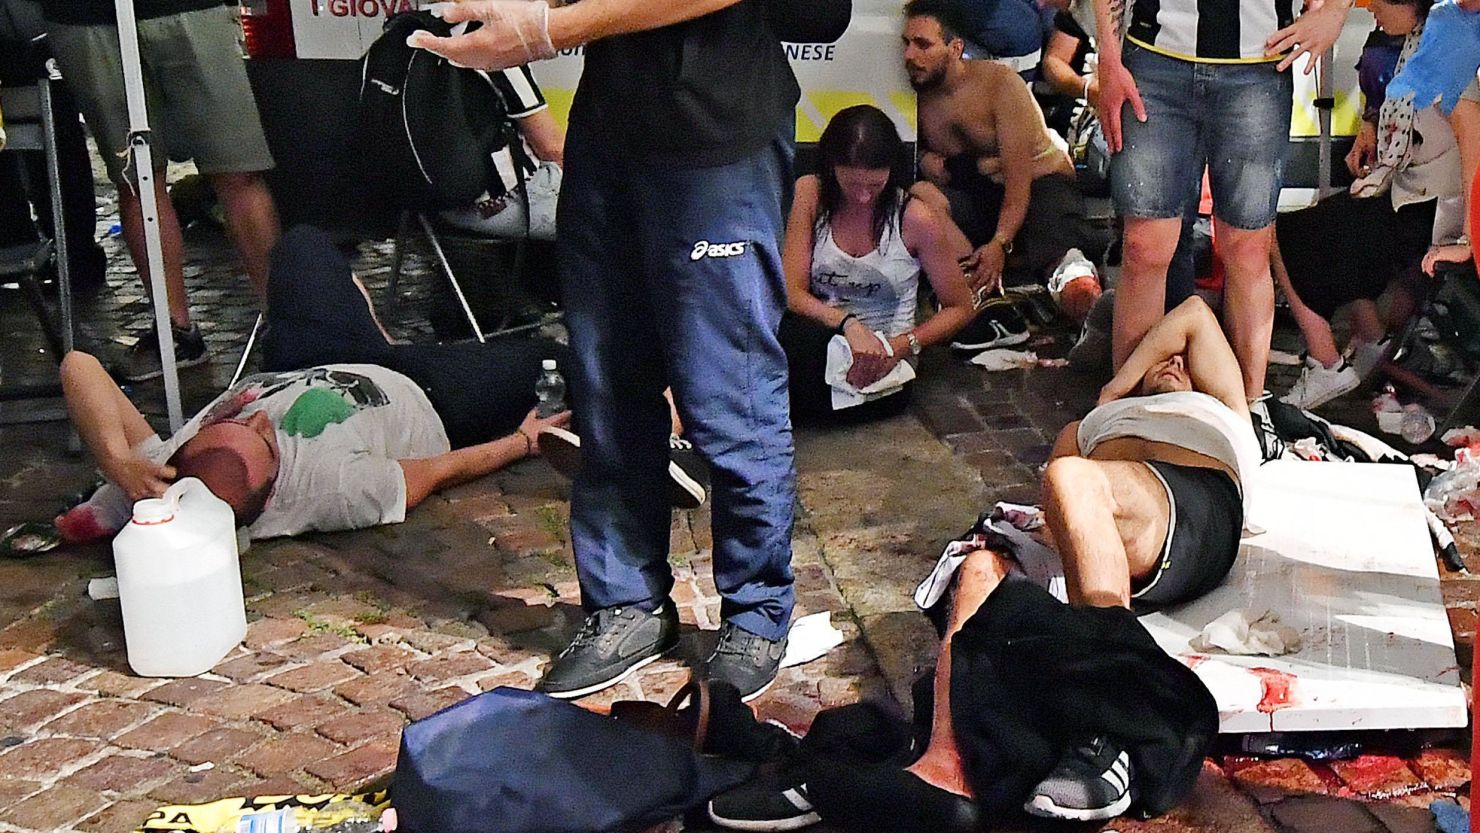 Injured soccer fans in Turin after a stampede at a viewing party.